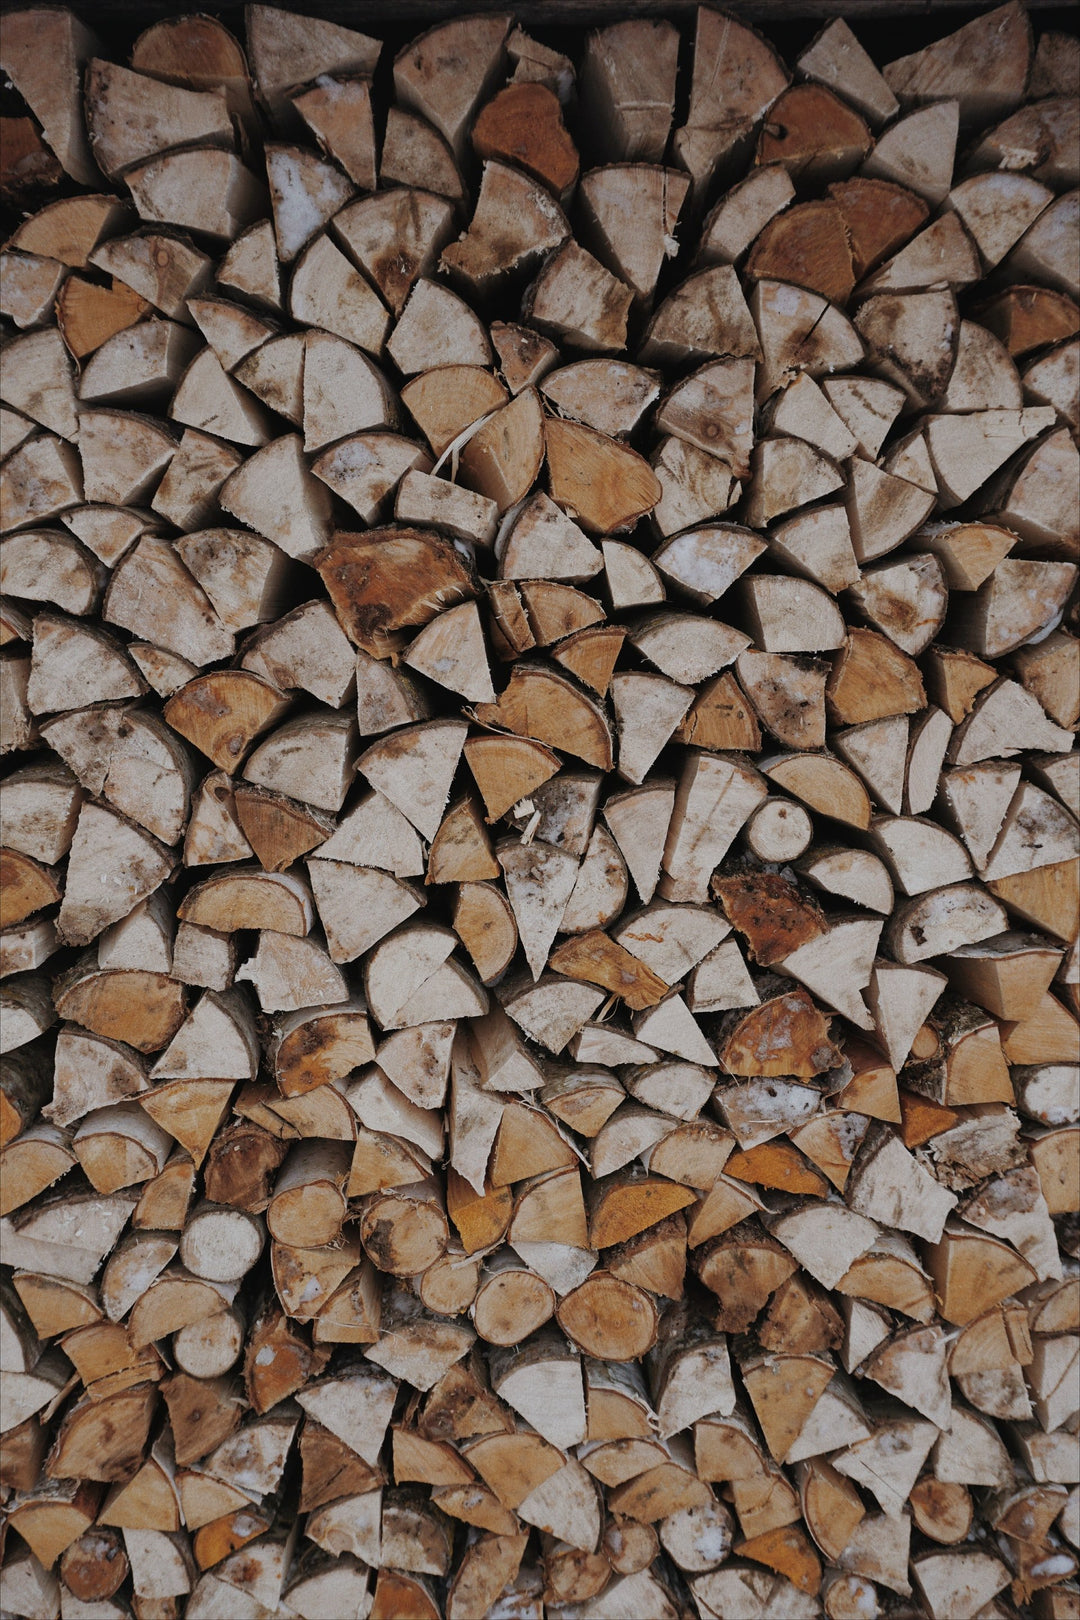 How to season and dry your own wood